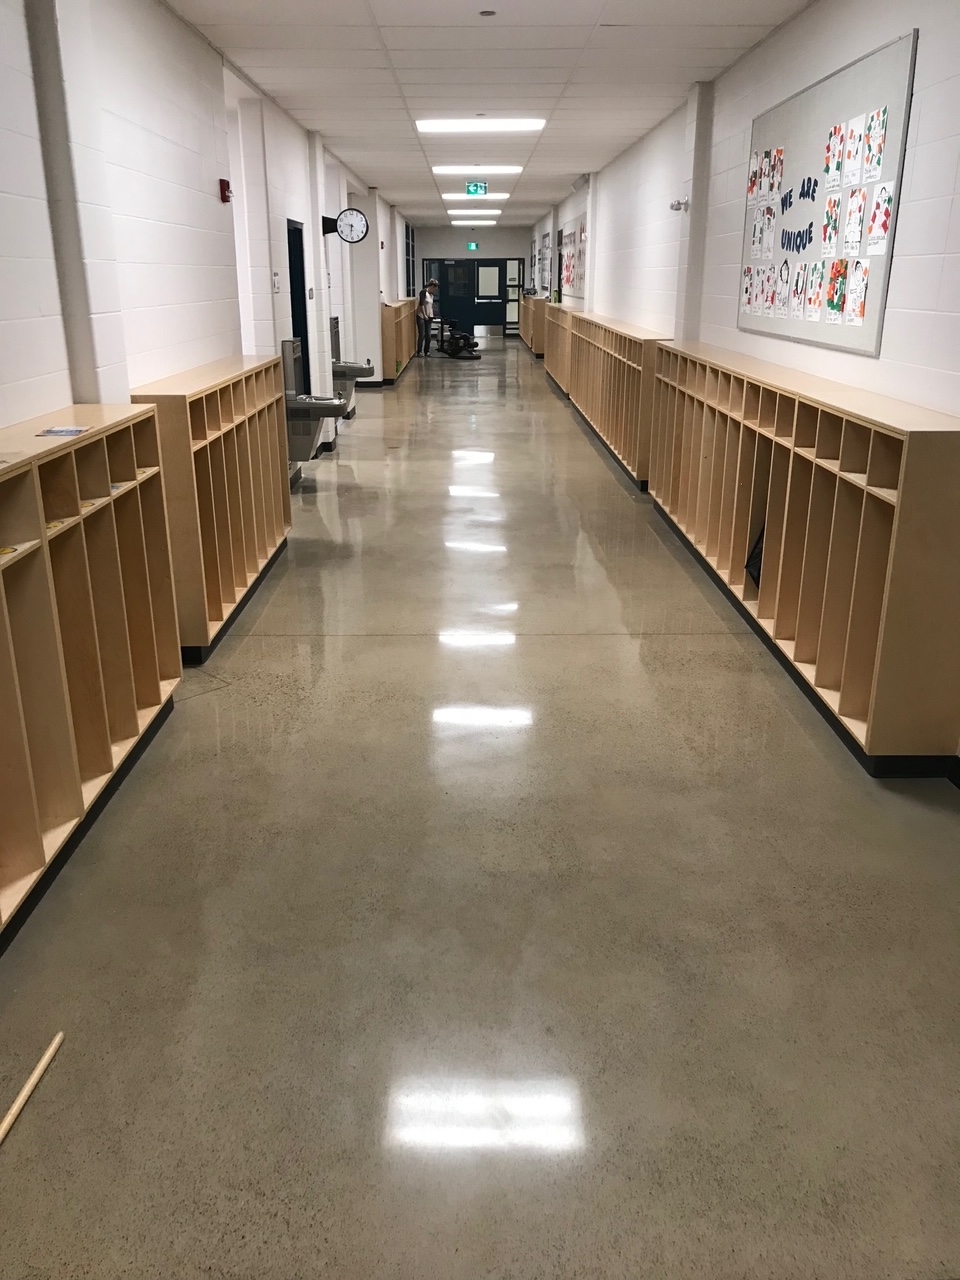 Dave McNeilly Public School - BTF Concrete Services - Staining & Polishing